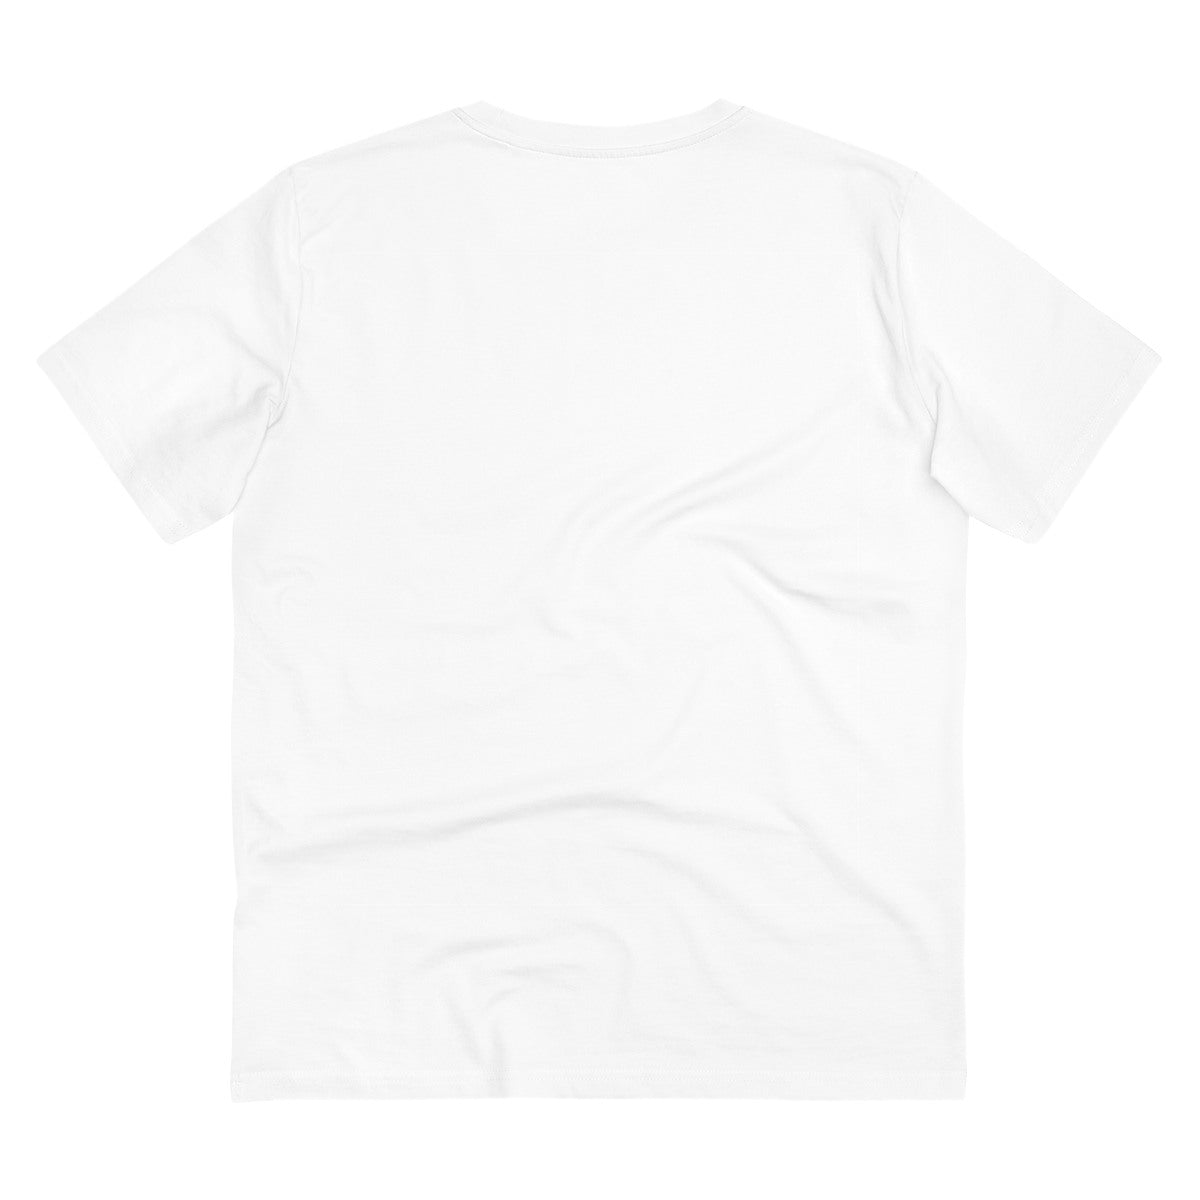 Men's PC Cotton 20th Birthday Printed T Shirt (Color: White, Thread Count: 180GSM) - GillKart